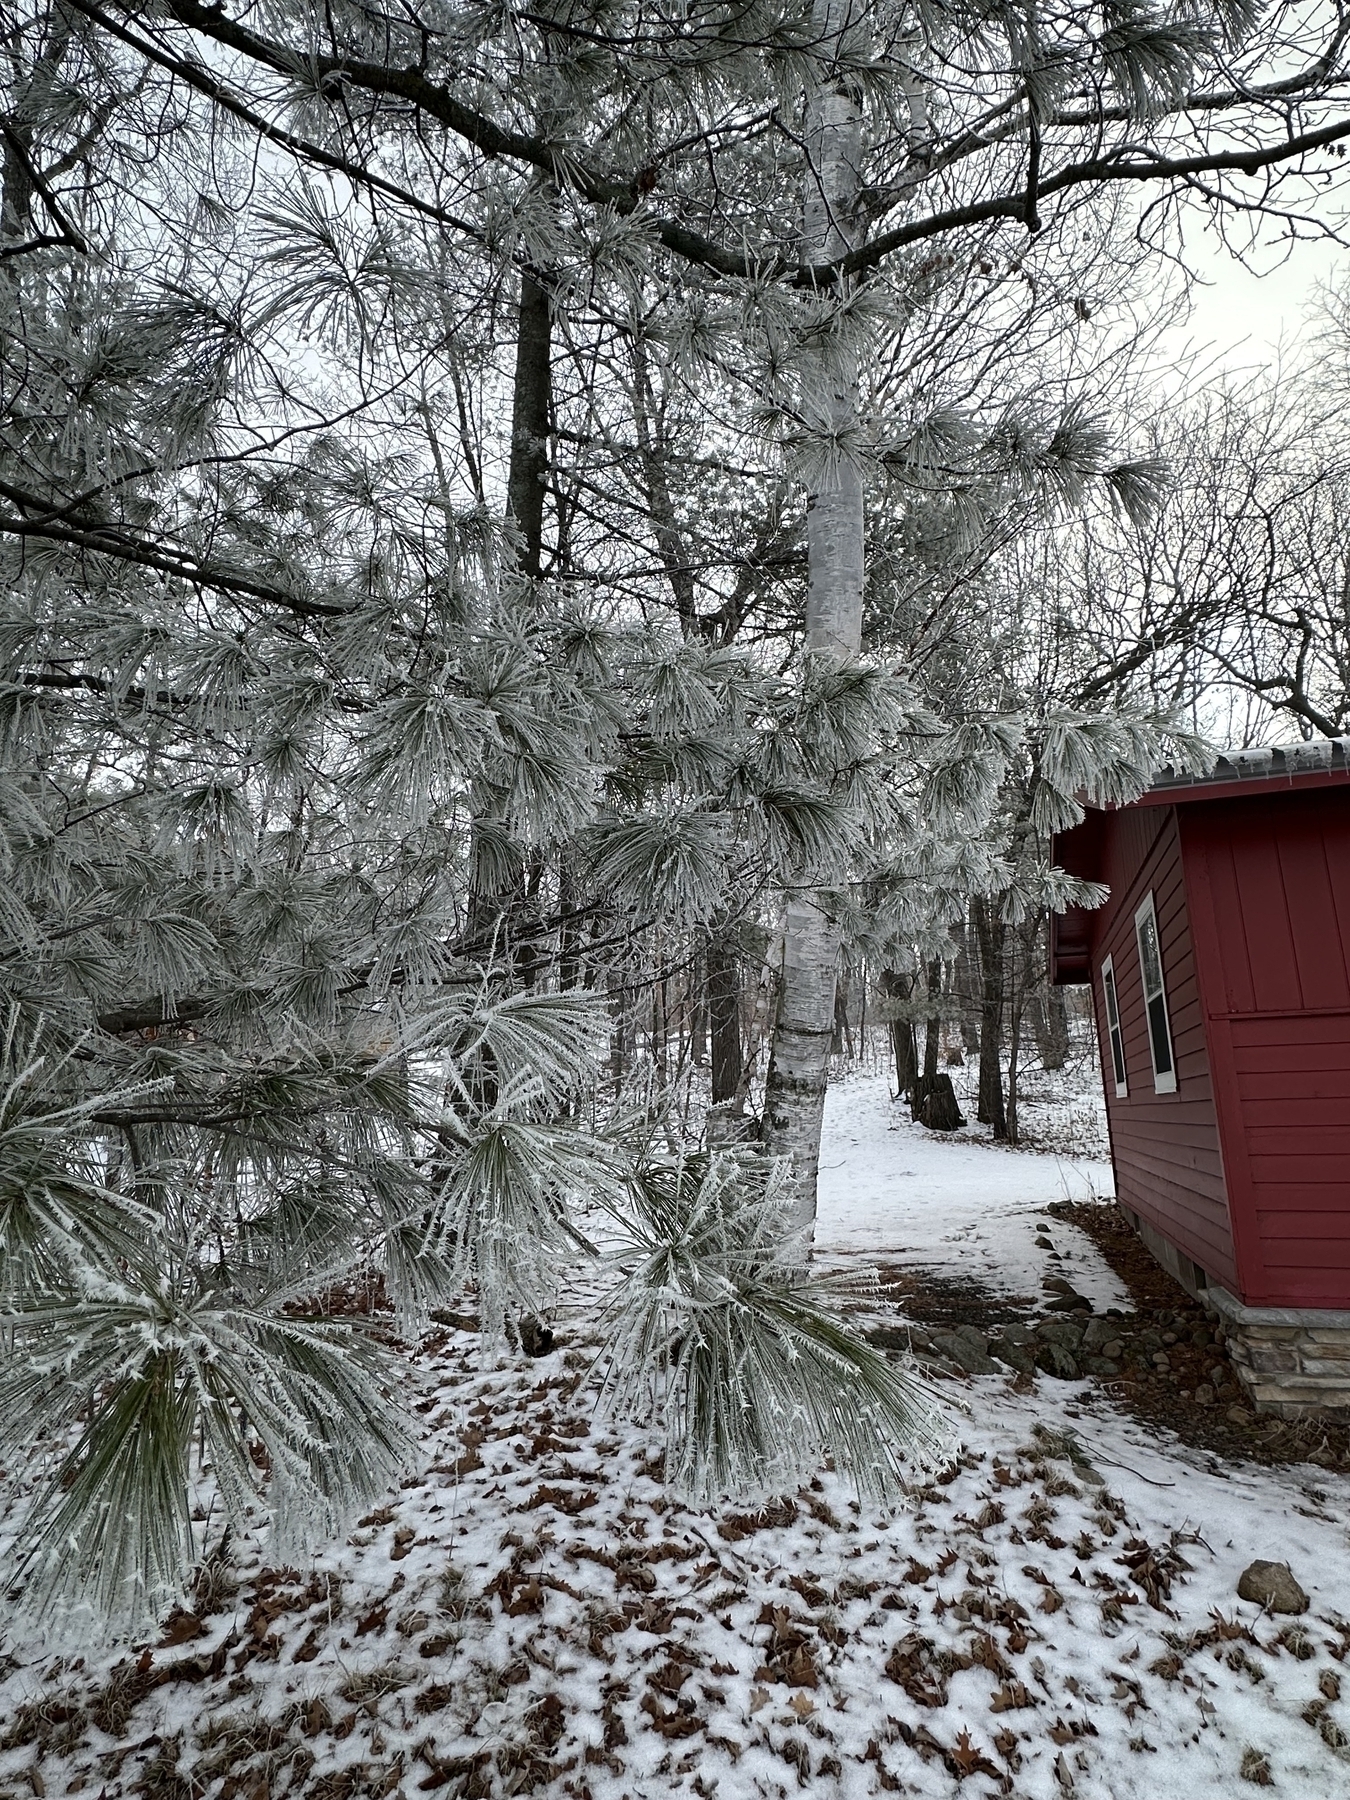 Multiple clusters of frost-covered white pine needles, next to a red cabin in wintry Minnesota 